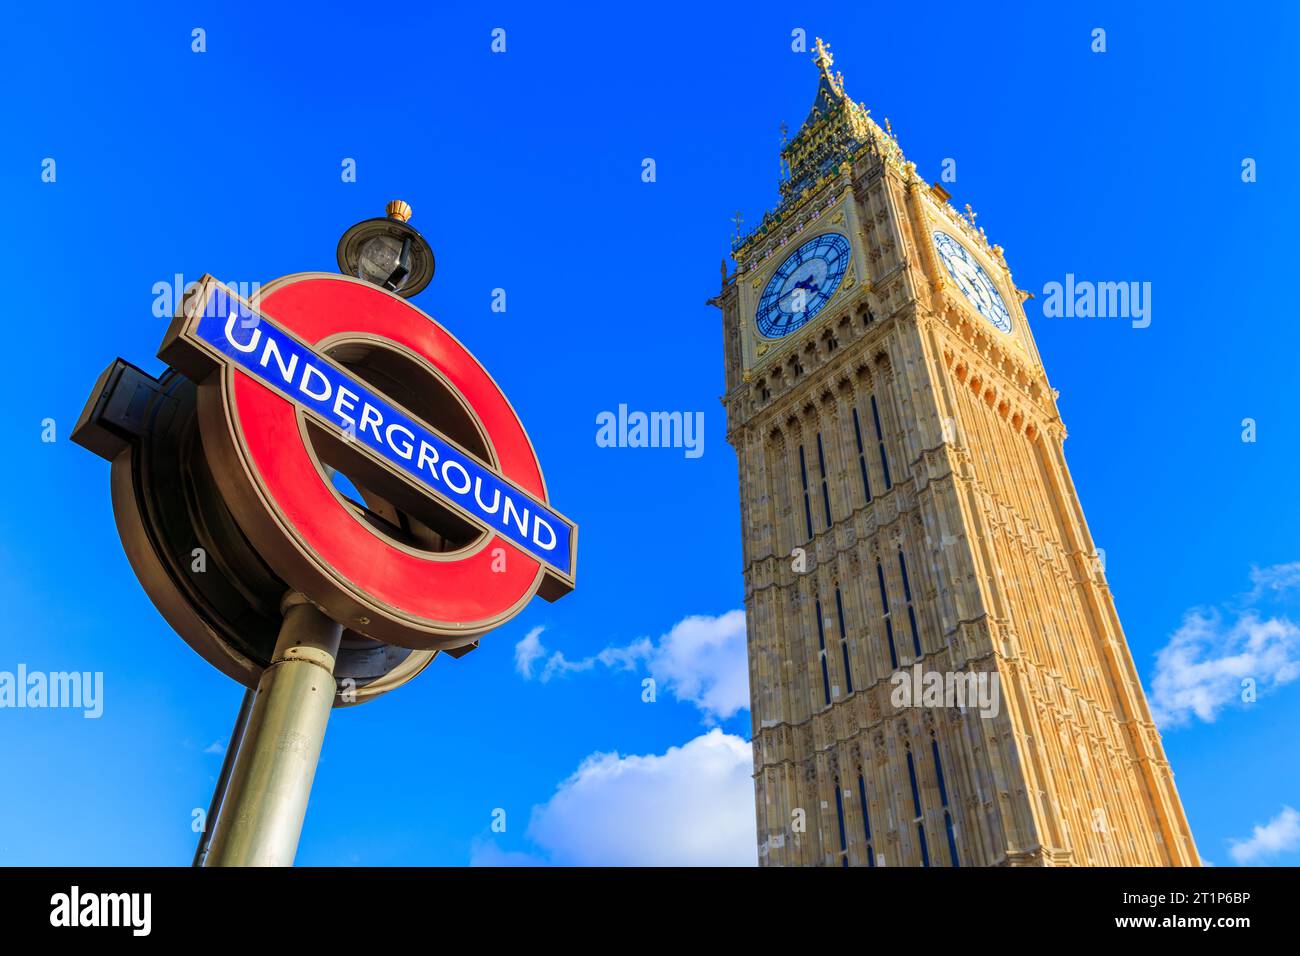 London, England, UK - March 14, 2023: The Big Ben clock tower and the London Underground sign. Stock Photo